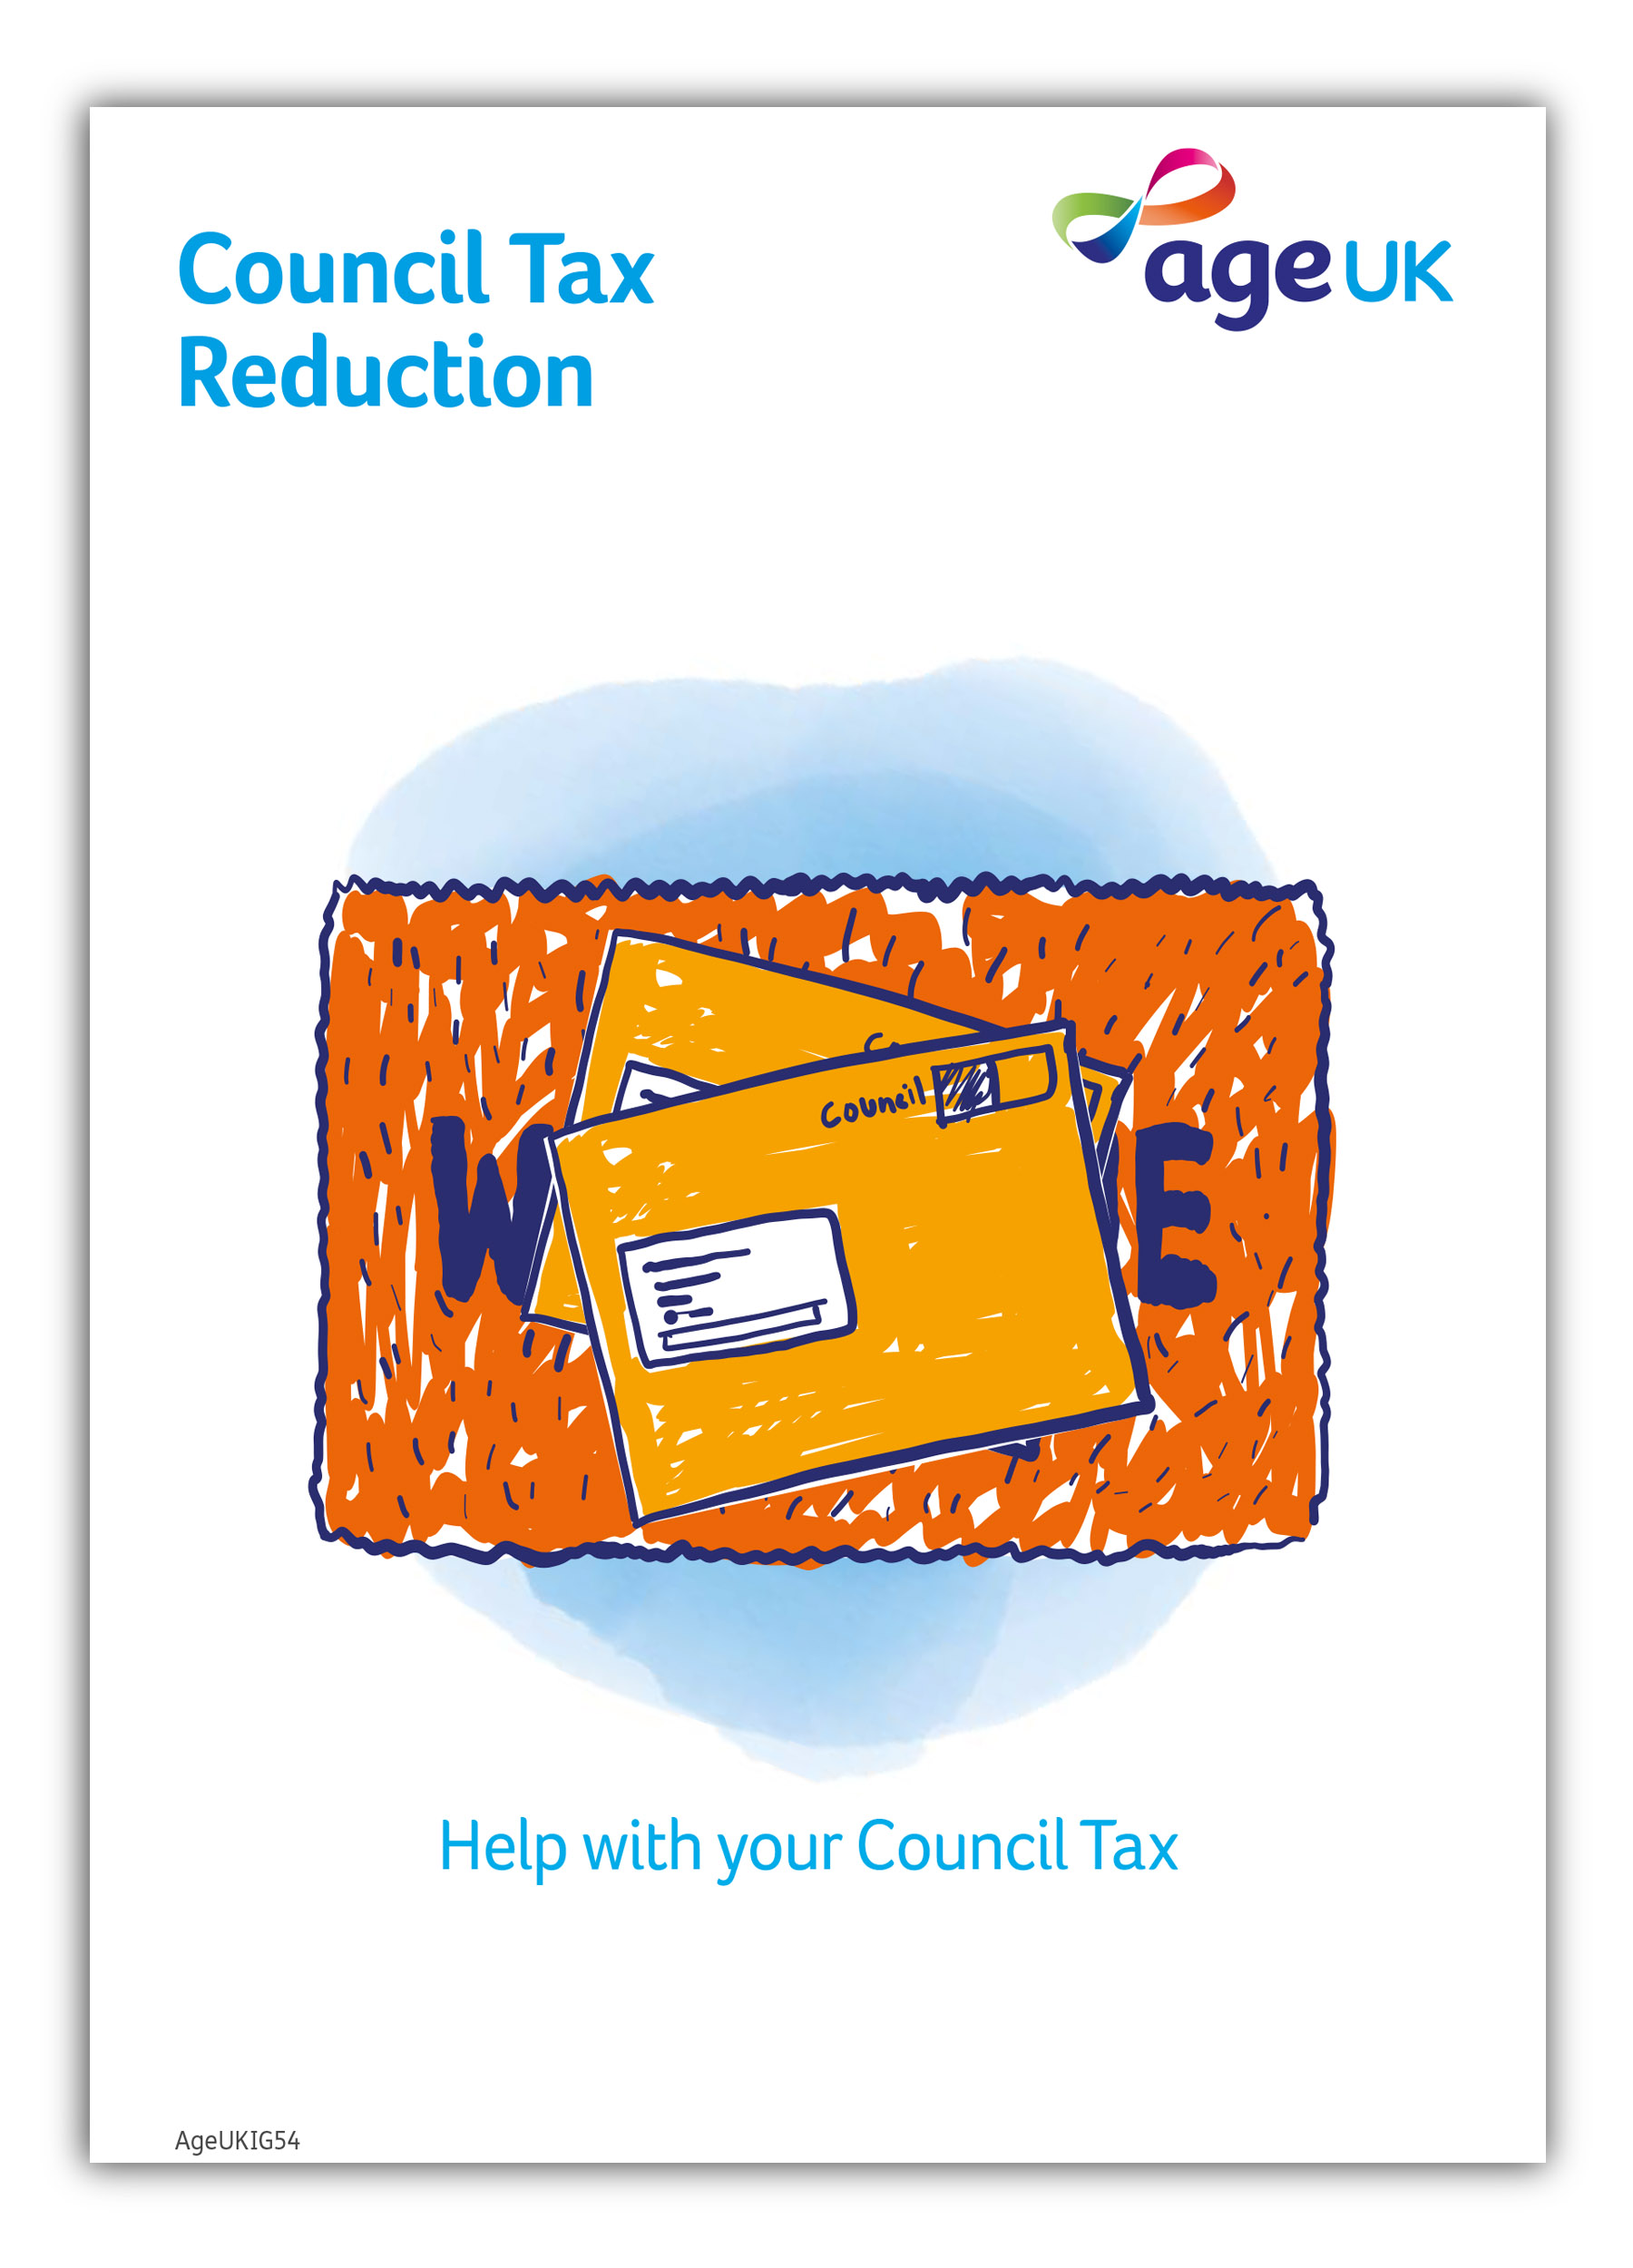 Council Tax Reduction cover.jpg